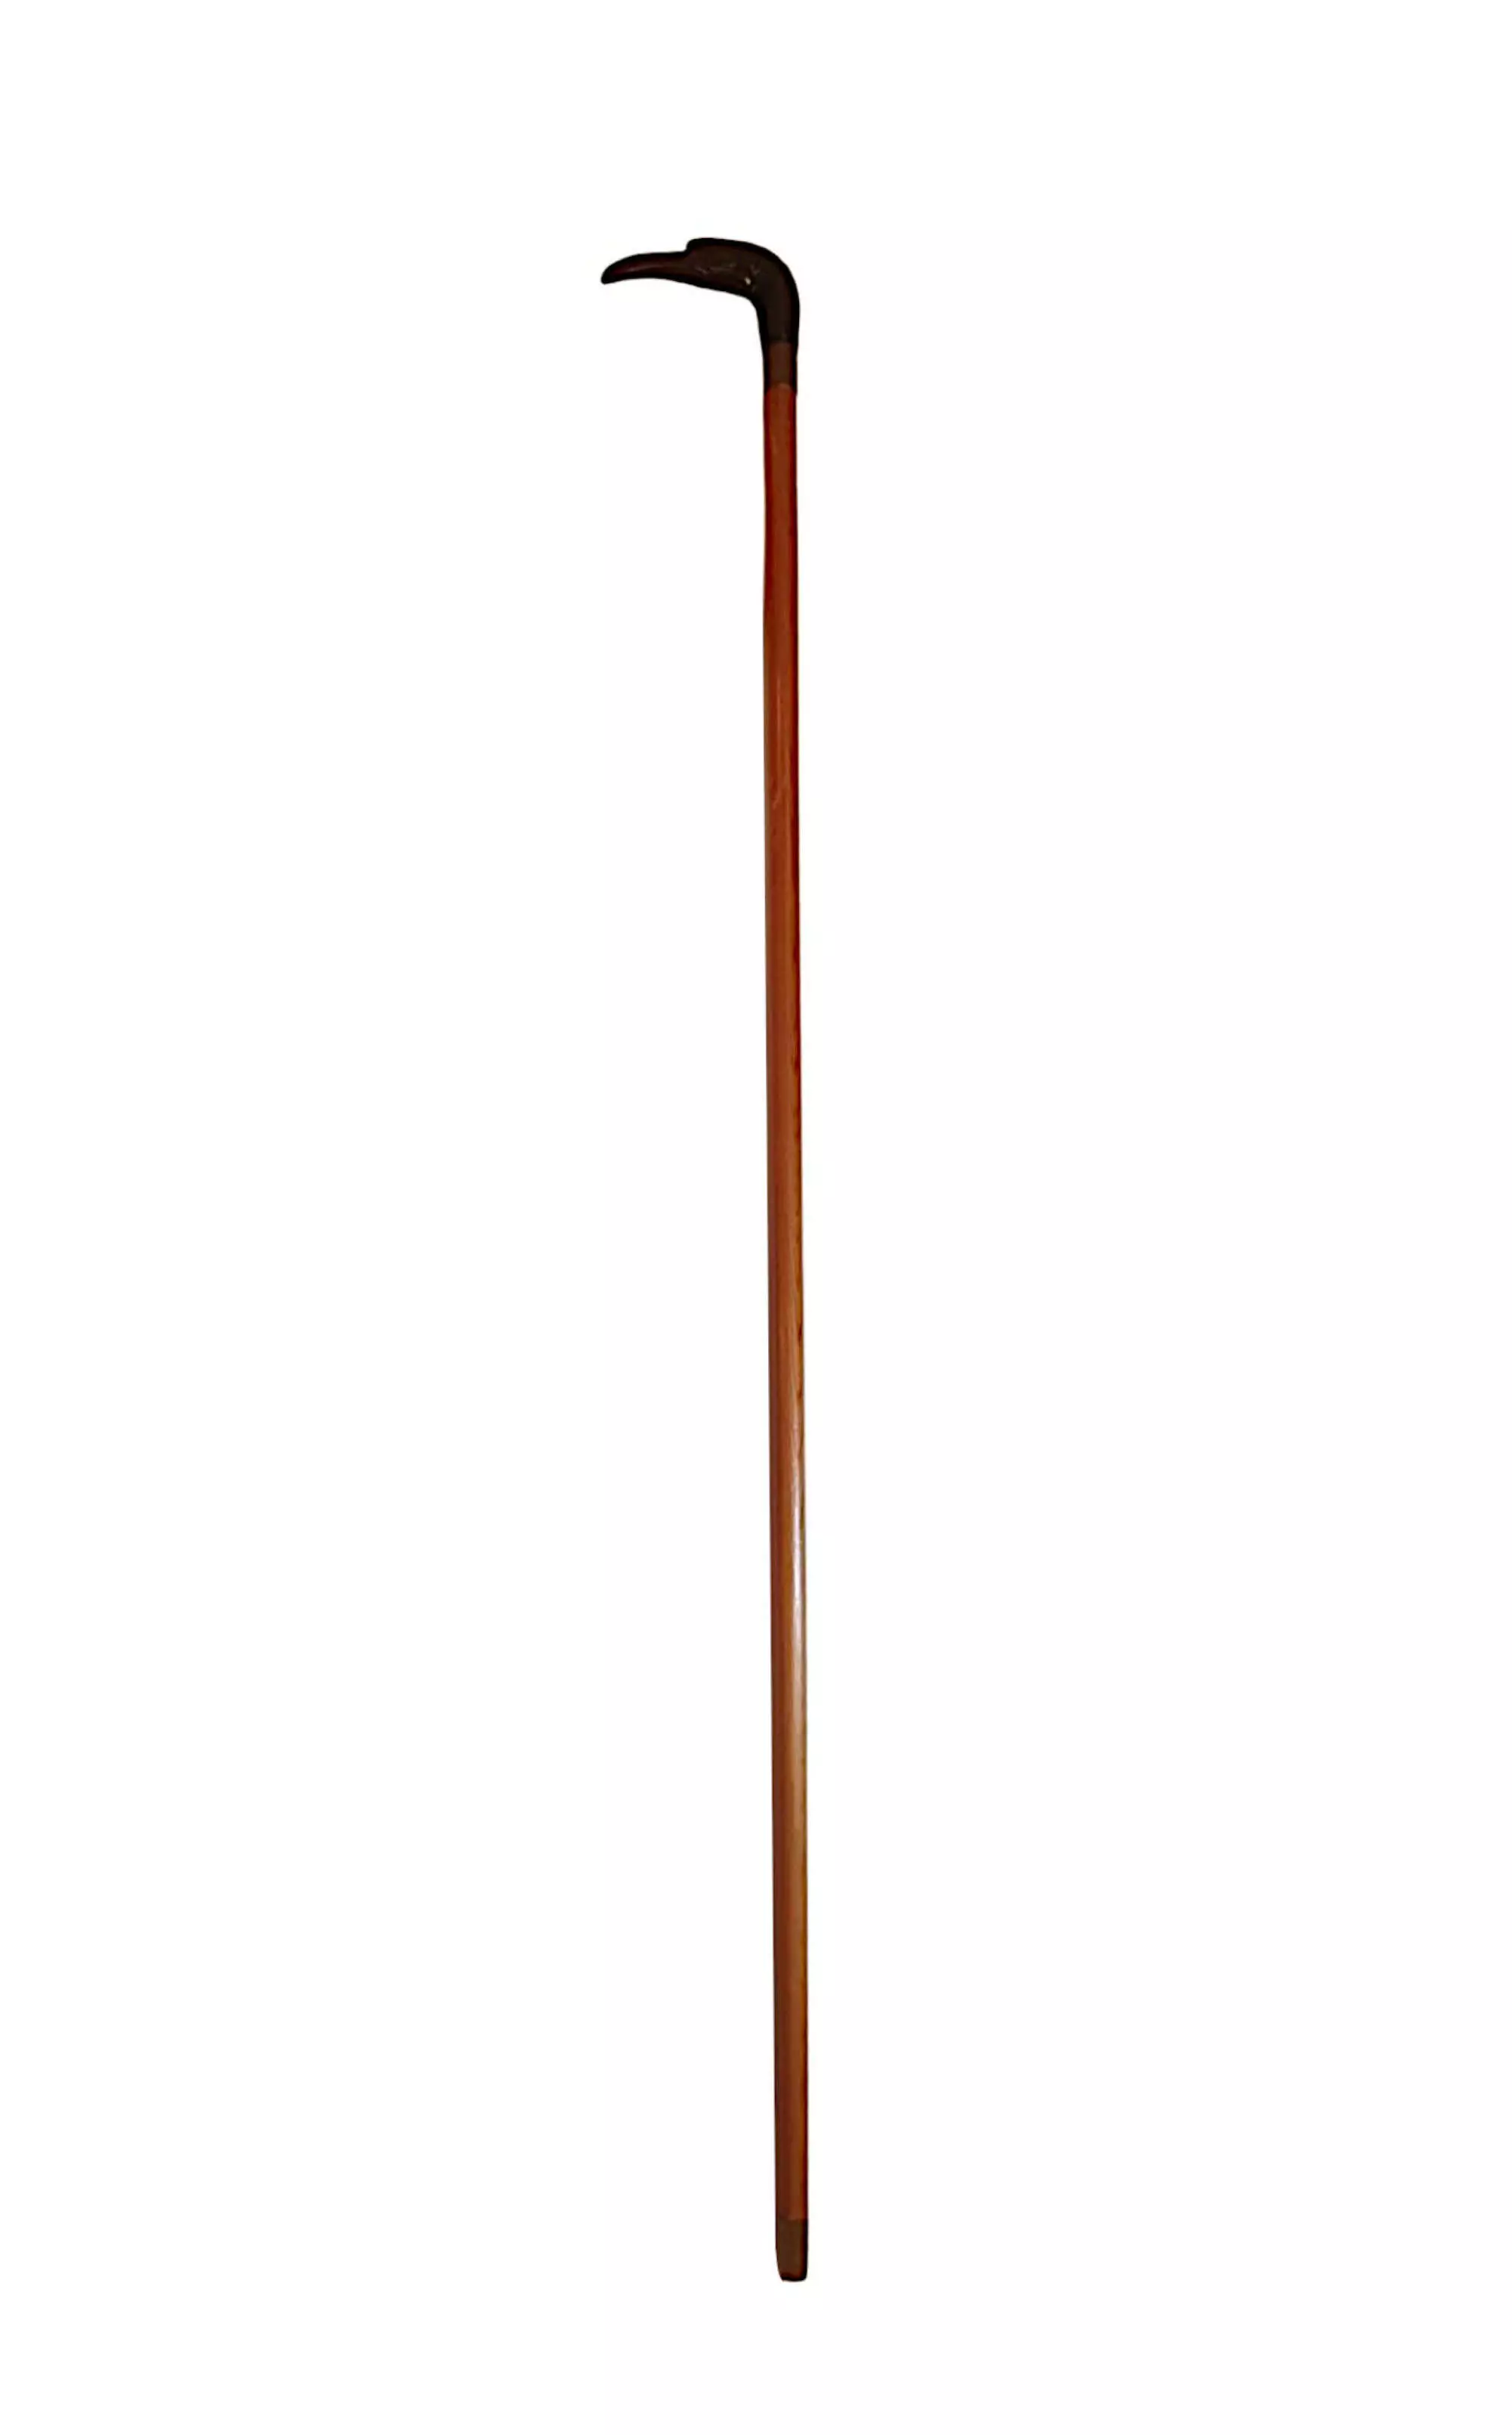 A 19th century Cypriot walking stick